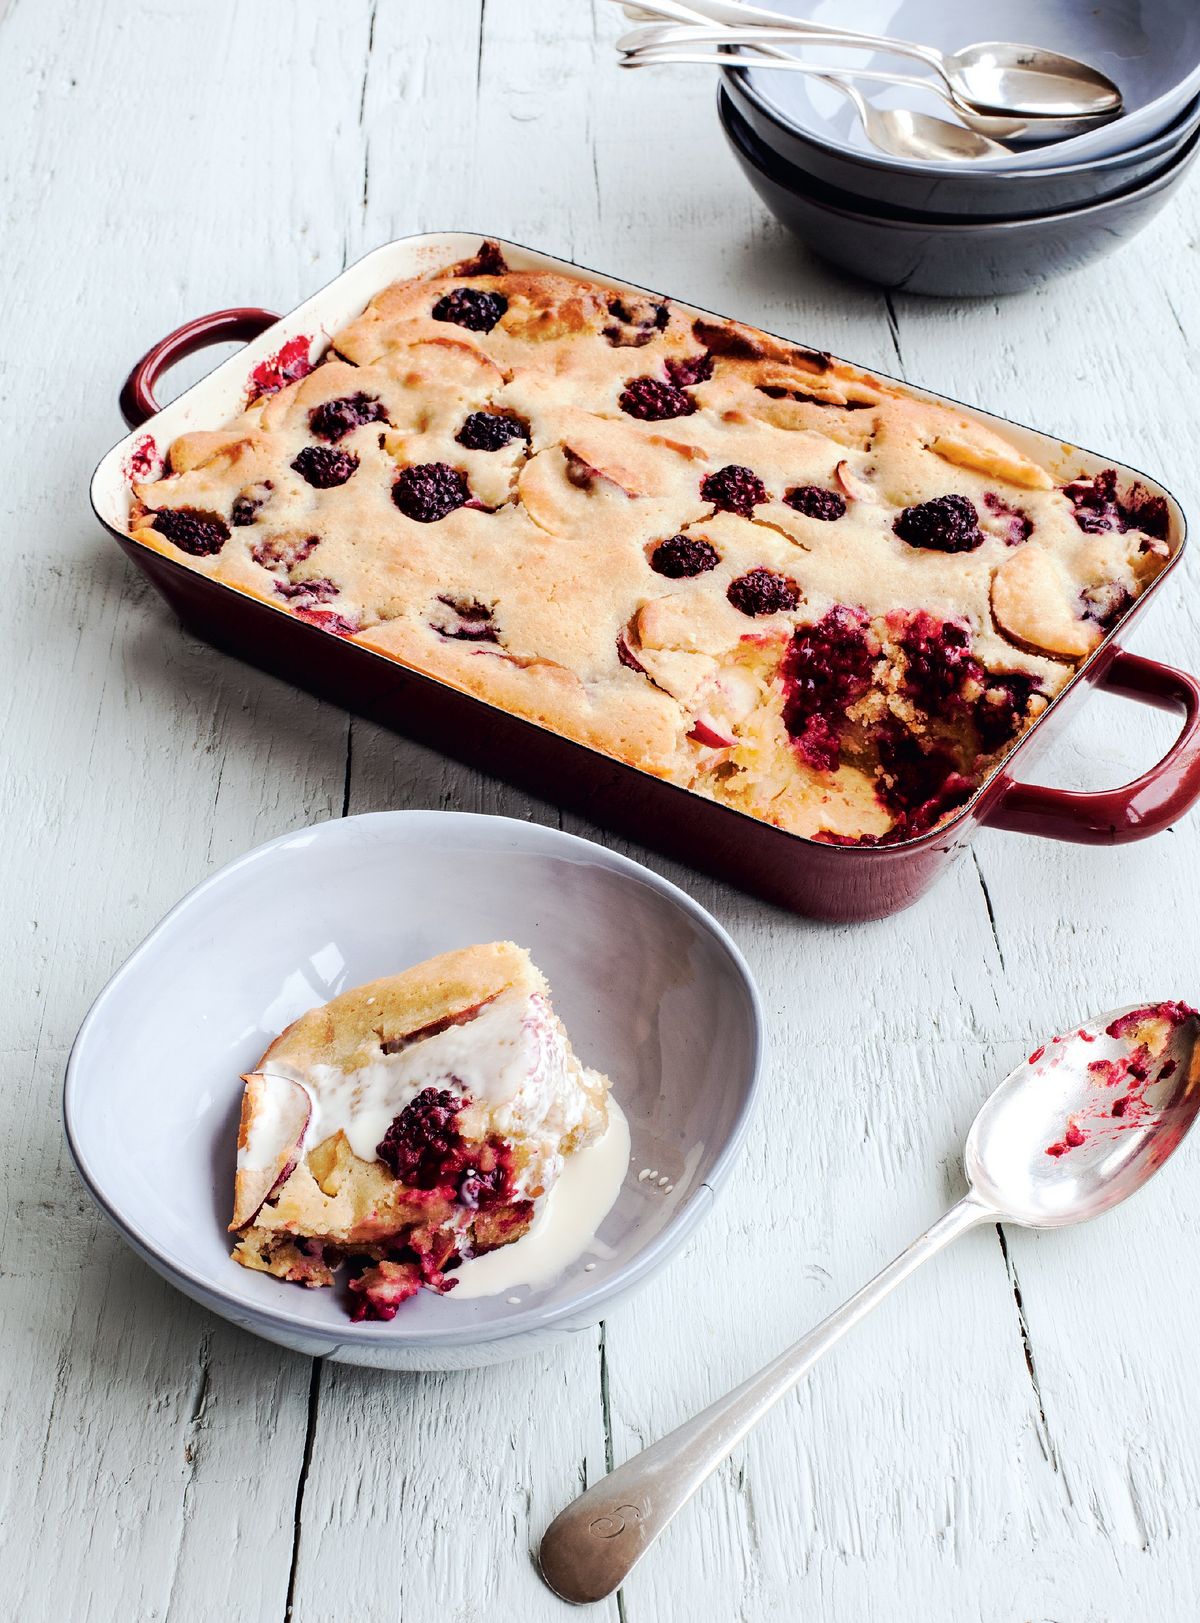 Blackberry and Apple Tray Bake